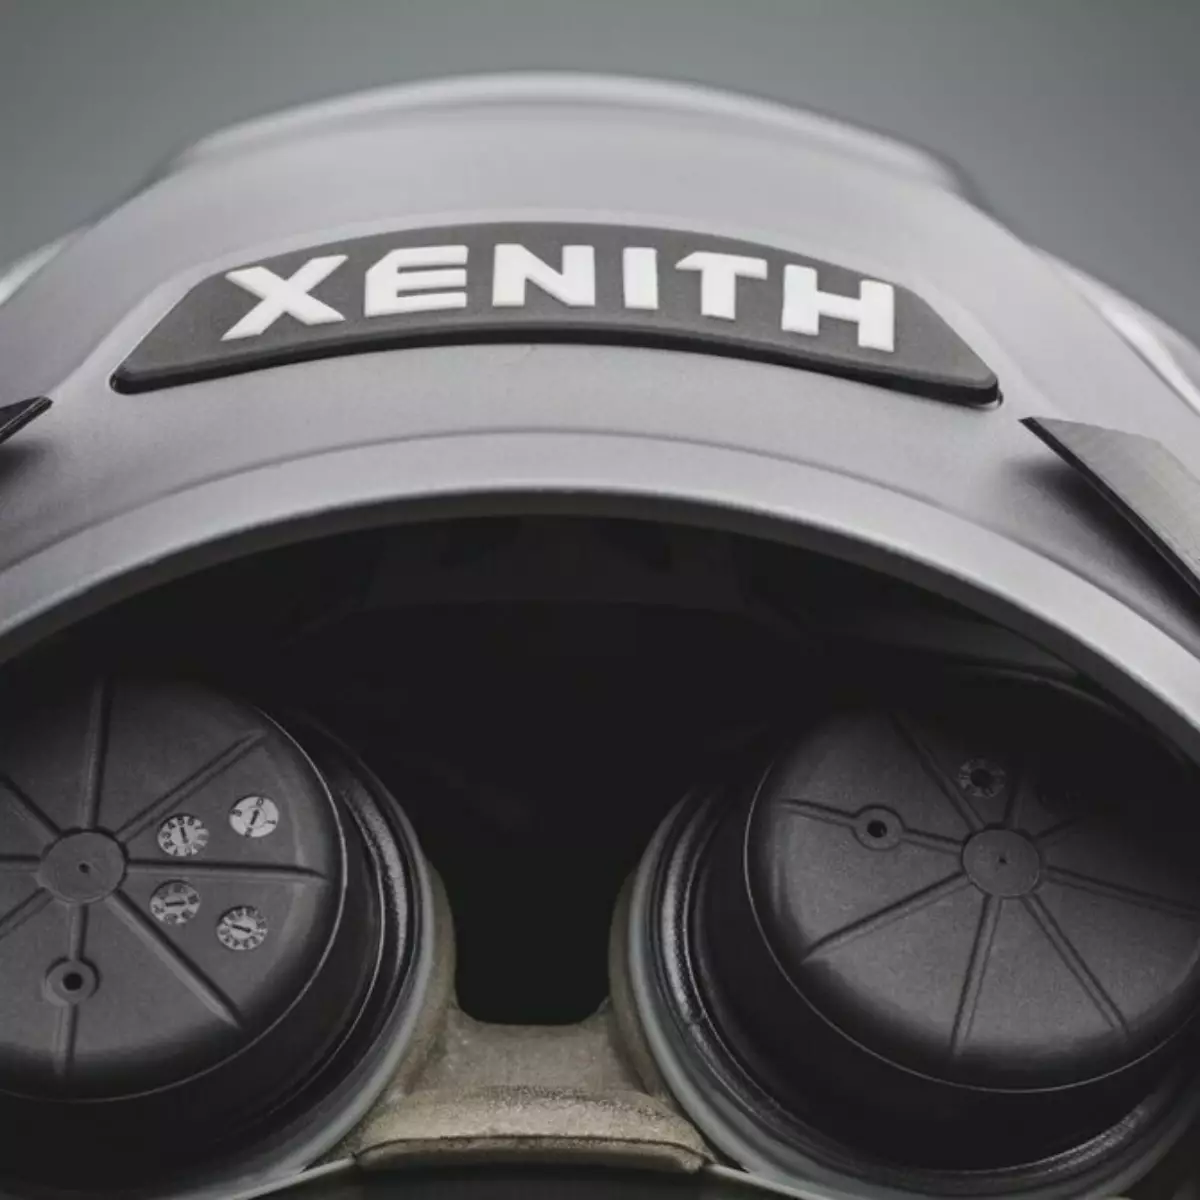 Backside view of a Xenith helmet, showing Single-Stage Shock Absorbers.